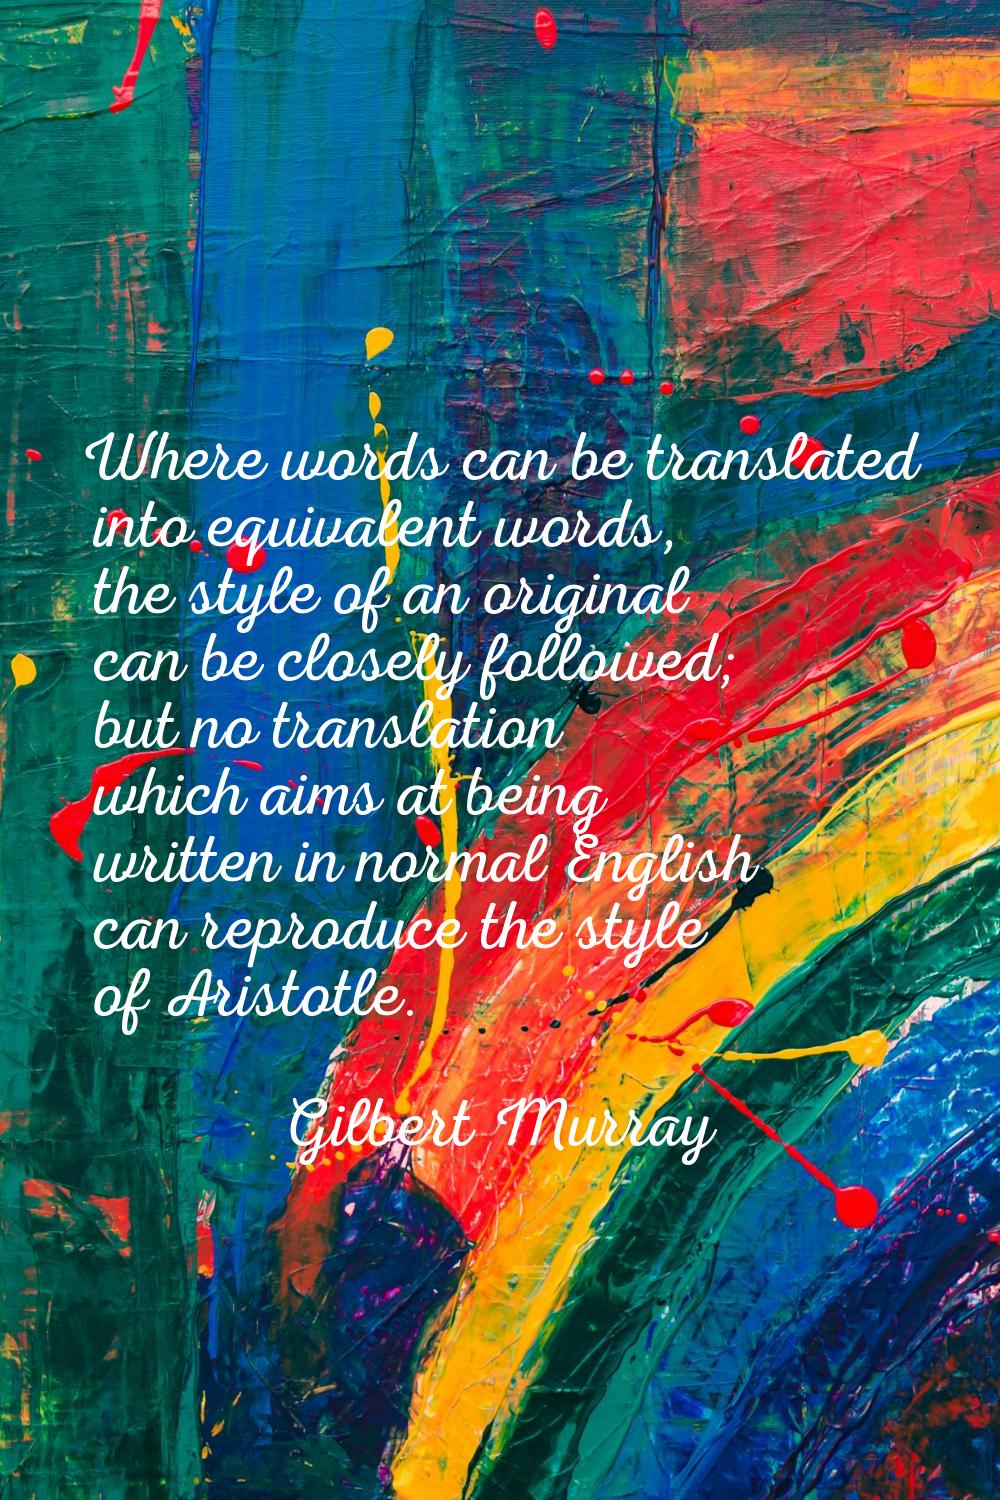 Where words can be translated into equivalent words, the style of an original can be closely follow